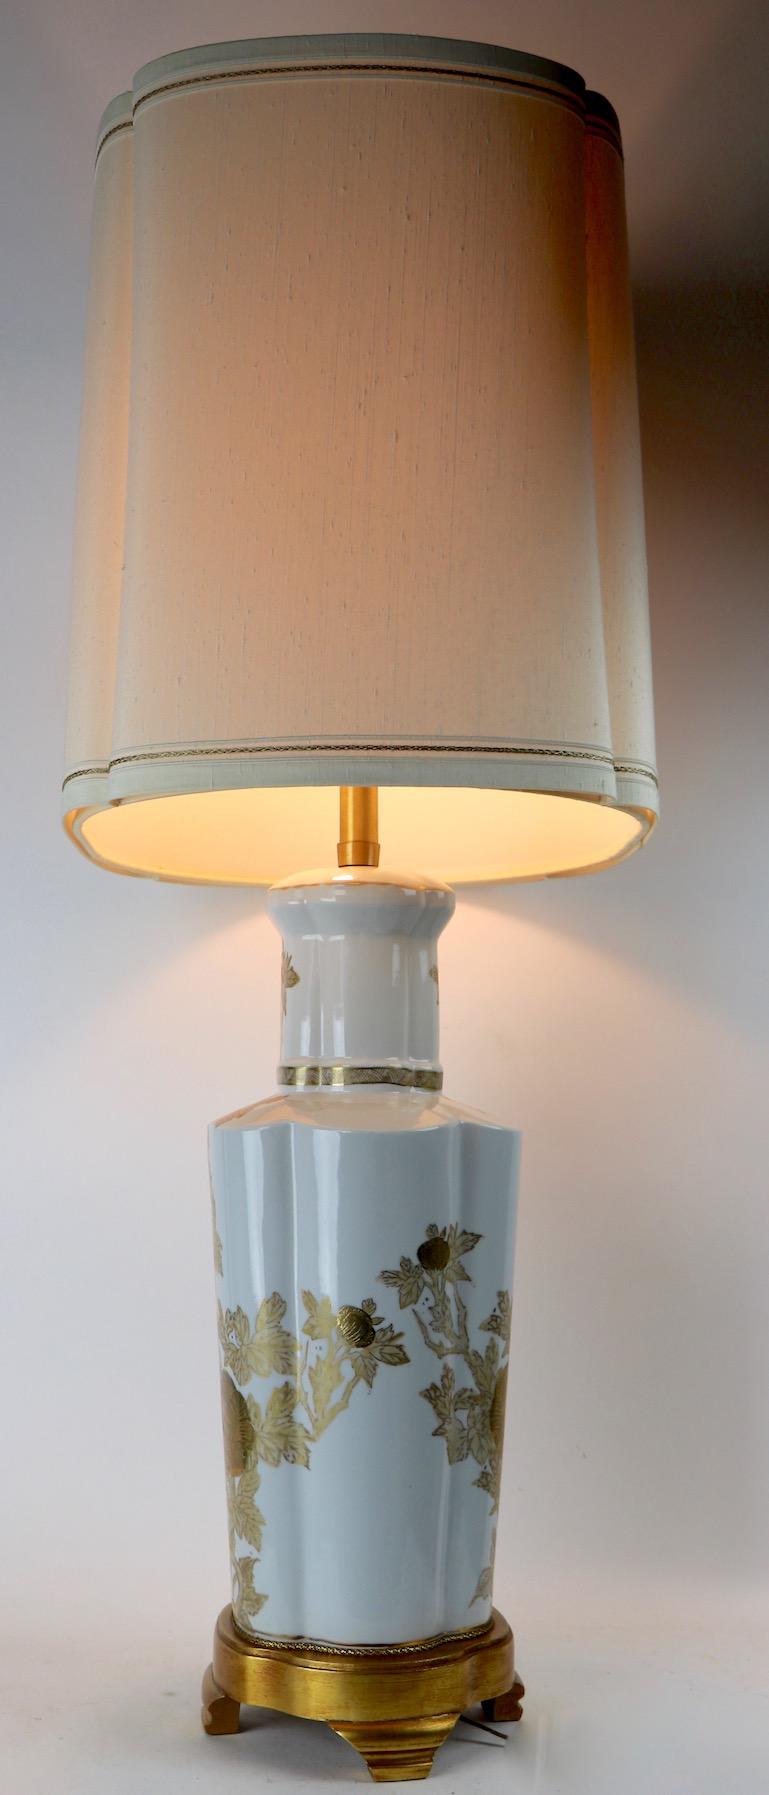 Chinese Style Porcelain Lamp by the Marlboro Lamp Company 7